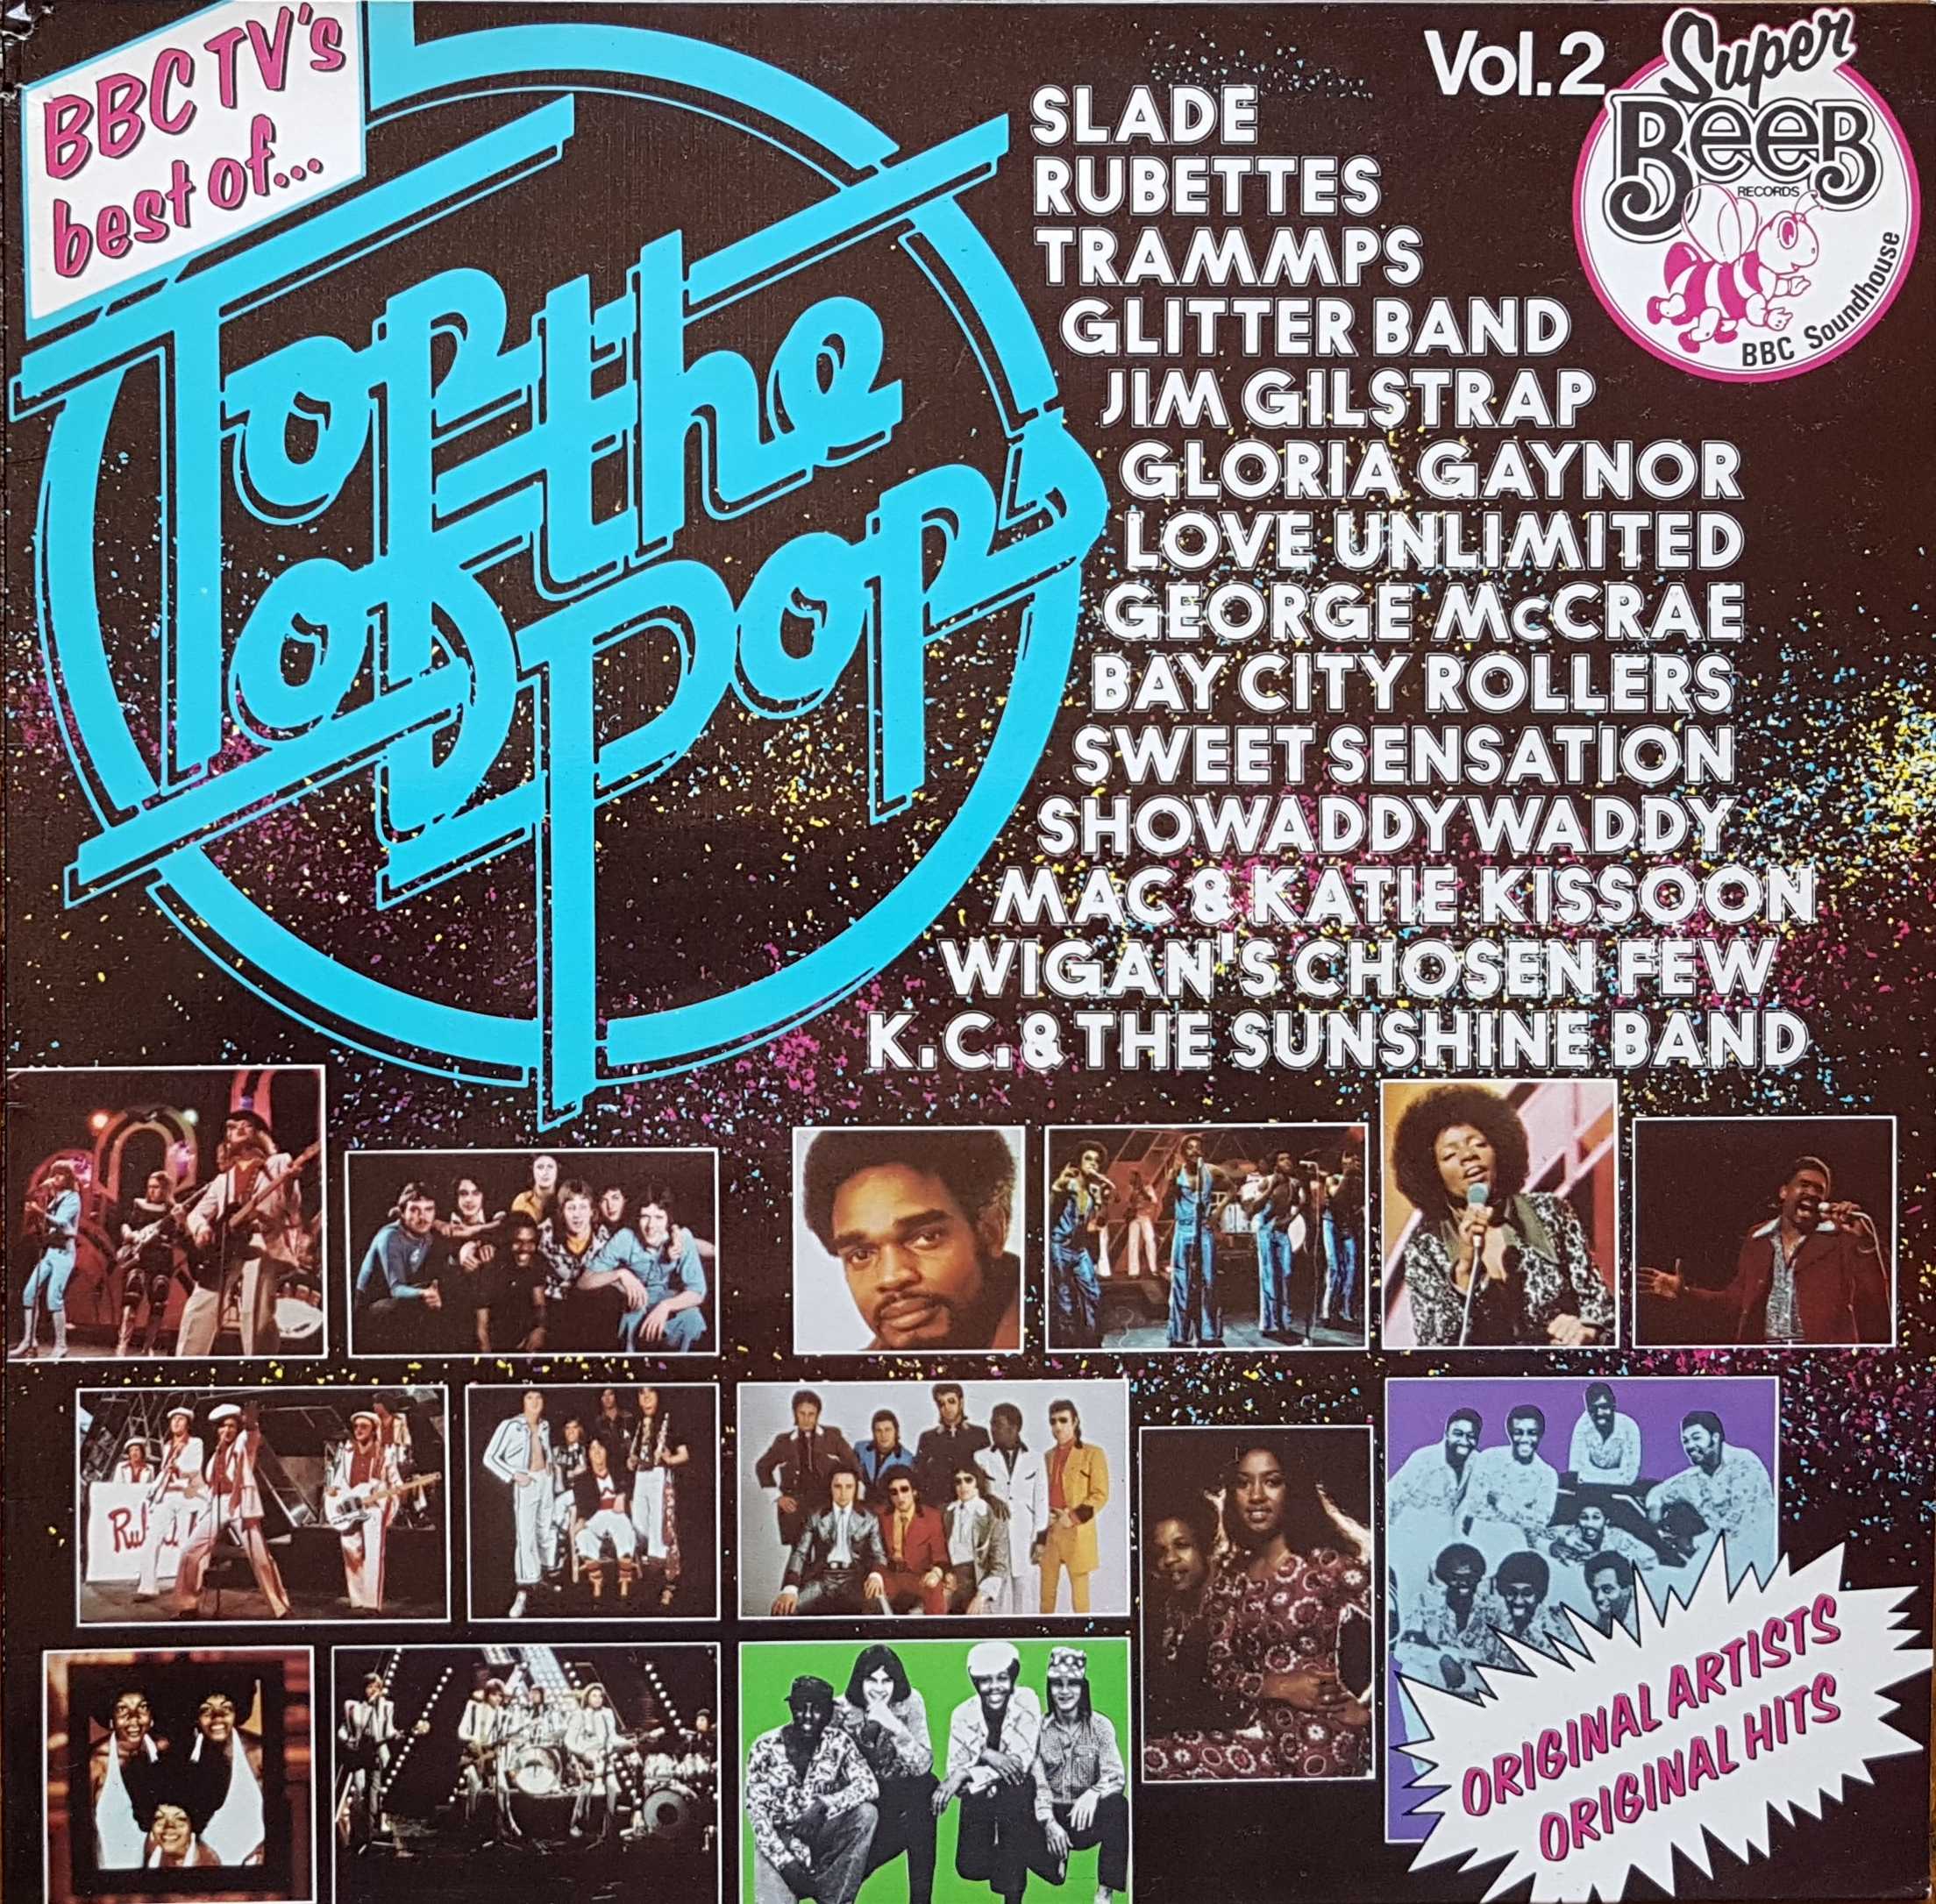 Picture of Top of the pops - Volume 2 by artist Various from the BBC albums - Records and Tapes library